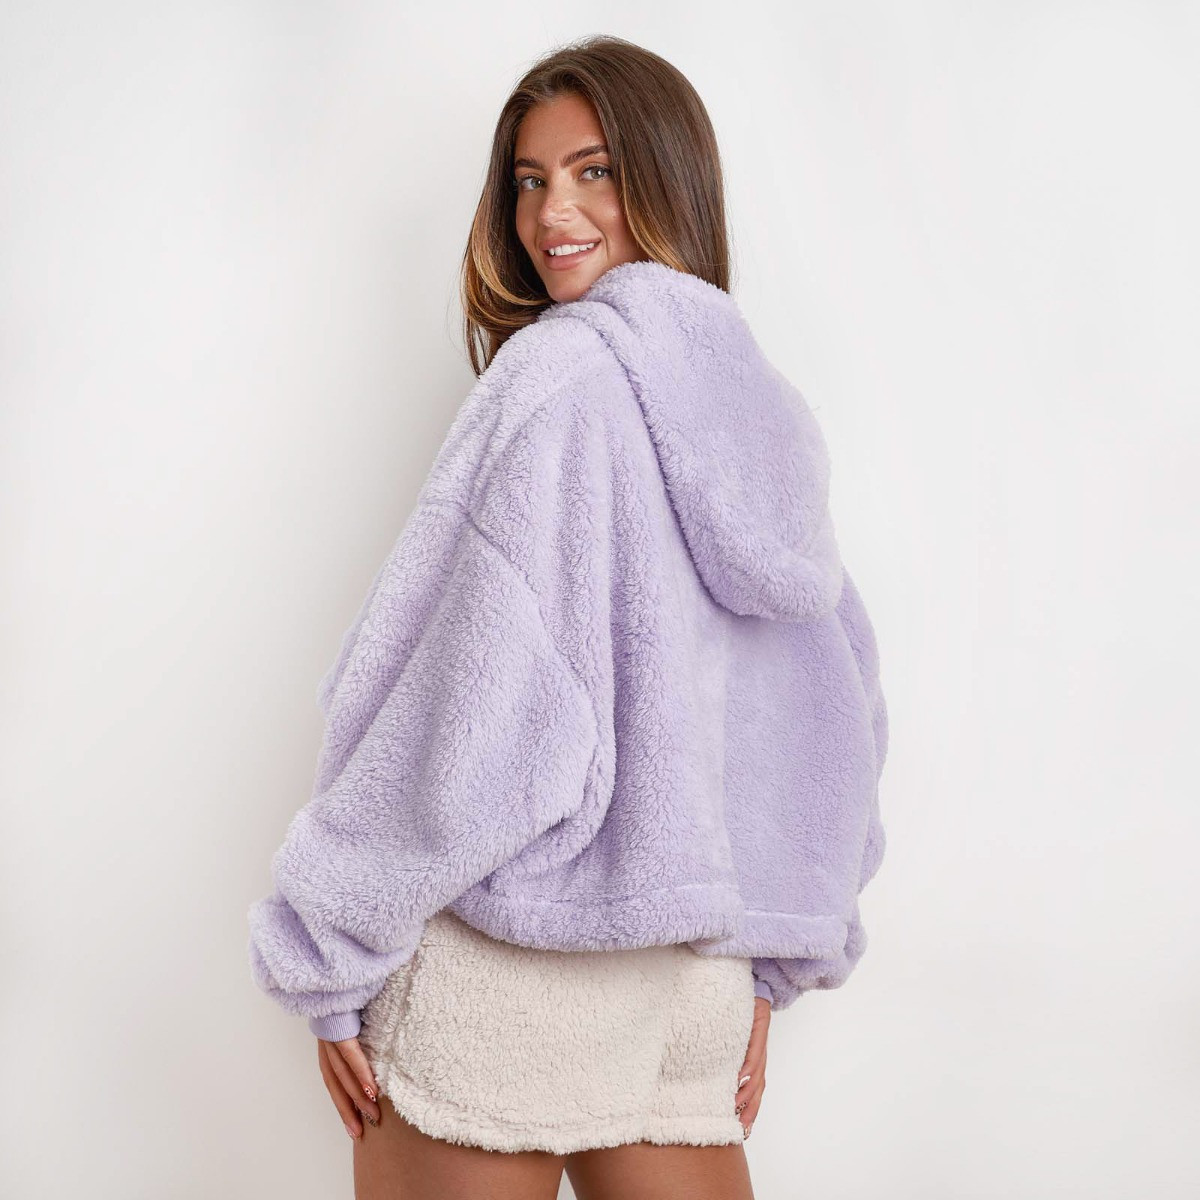 Brentfords Cropped Teddy Fleece Hoodie, One Size - Lilac>